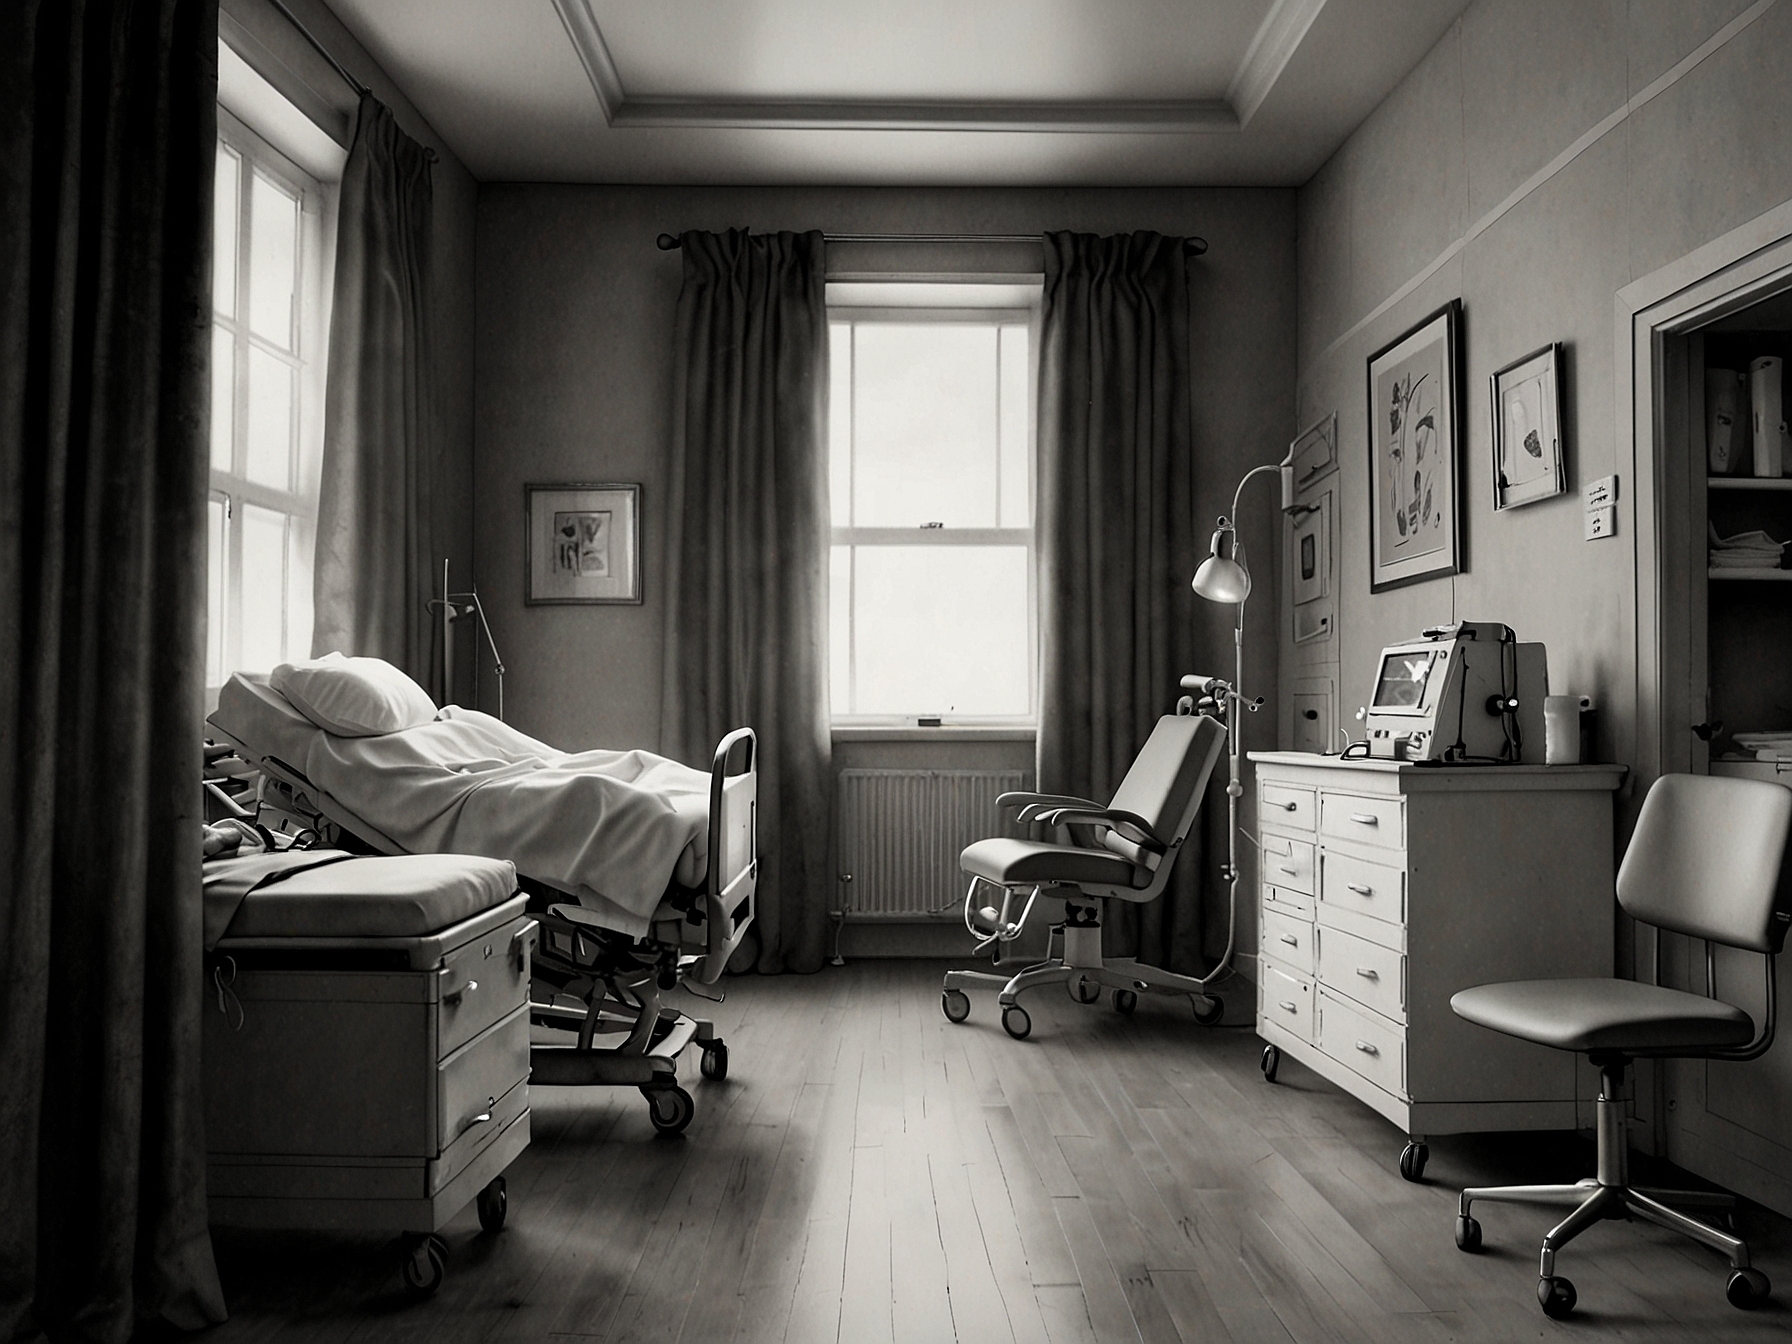 An image depicting a hospital room, filled with medical machinery and a bed, symbolizing the relentless medical battles faced by Graham Caveney as described in 'The Body in the Library'.